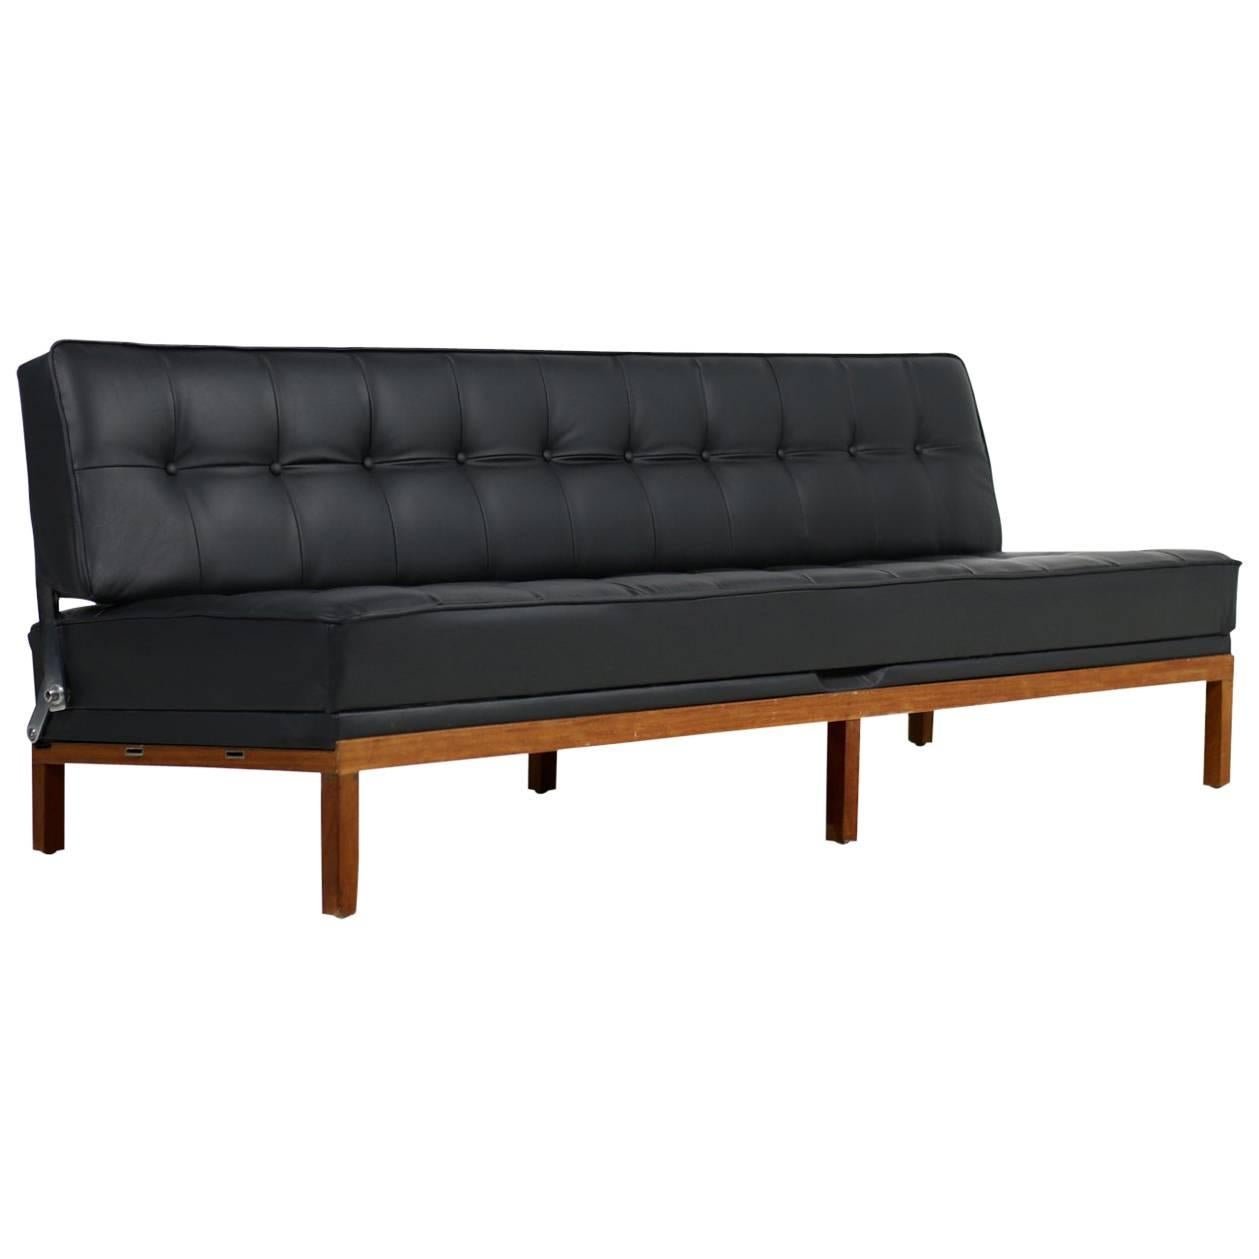 1960s Daybed by Johannes Spalt Mod. 'Constanze' for Wittmann Teak & Leather Sofa